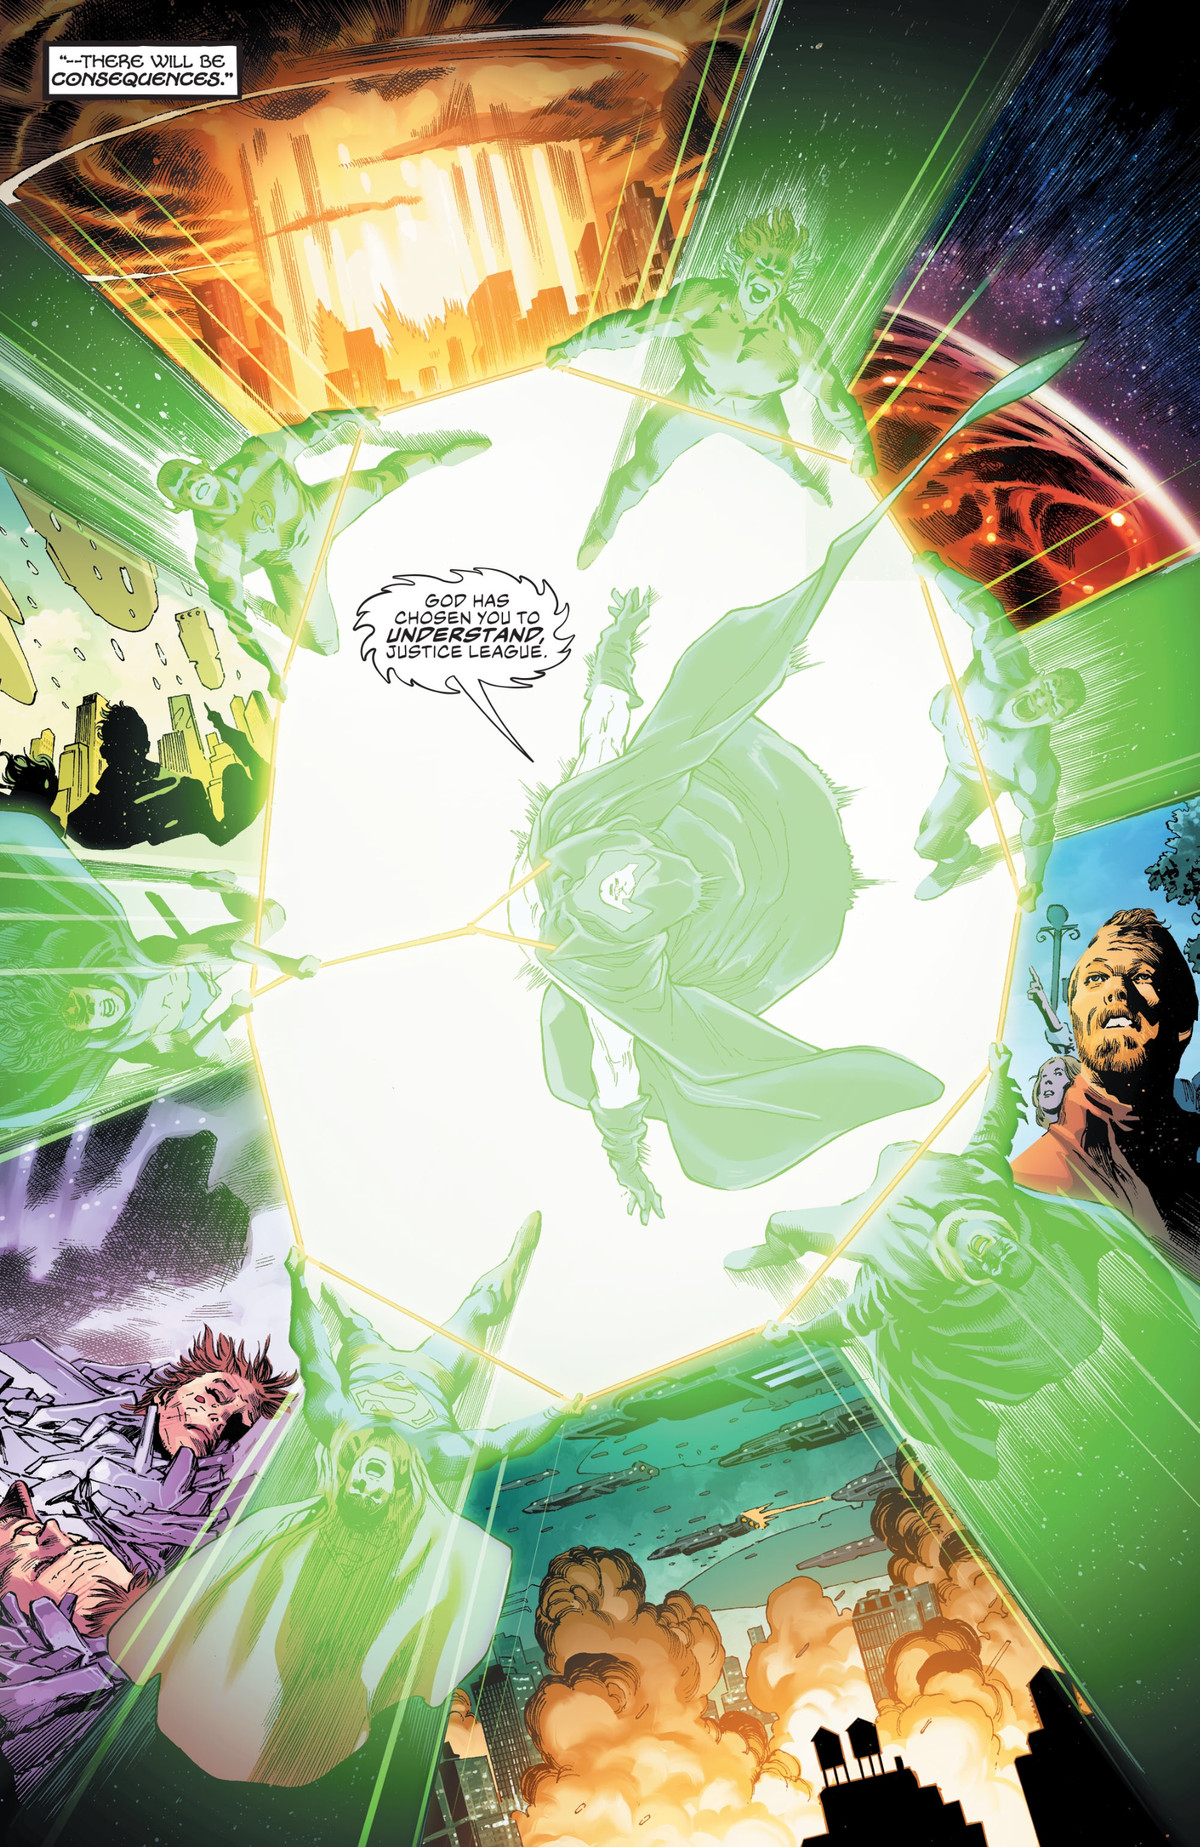 As they are all connected by Wonder Woman’s golden lasso, the Spectre gives the Justice League a violent vision of the future, if there is no host to focus his vengeful nature, in Justice League #45. 